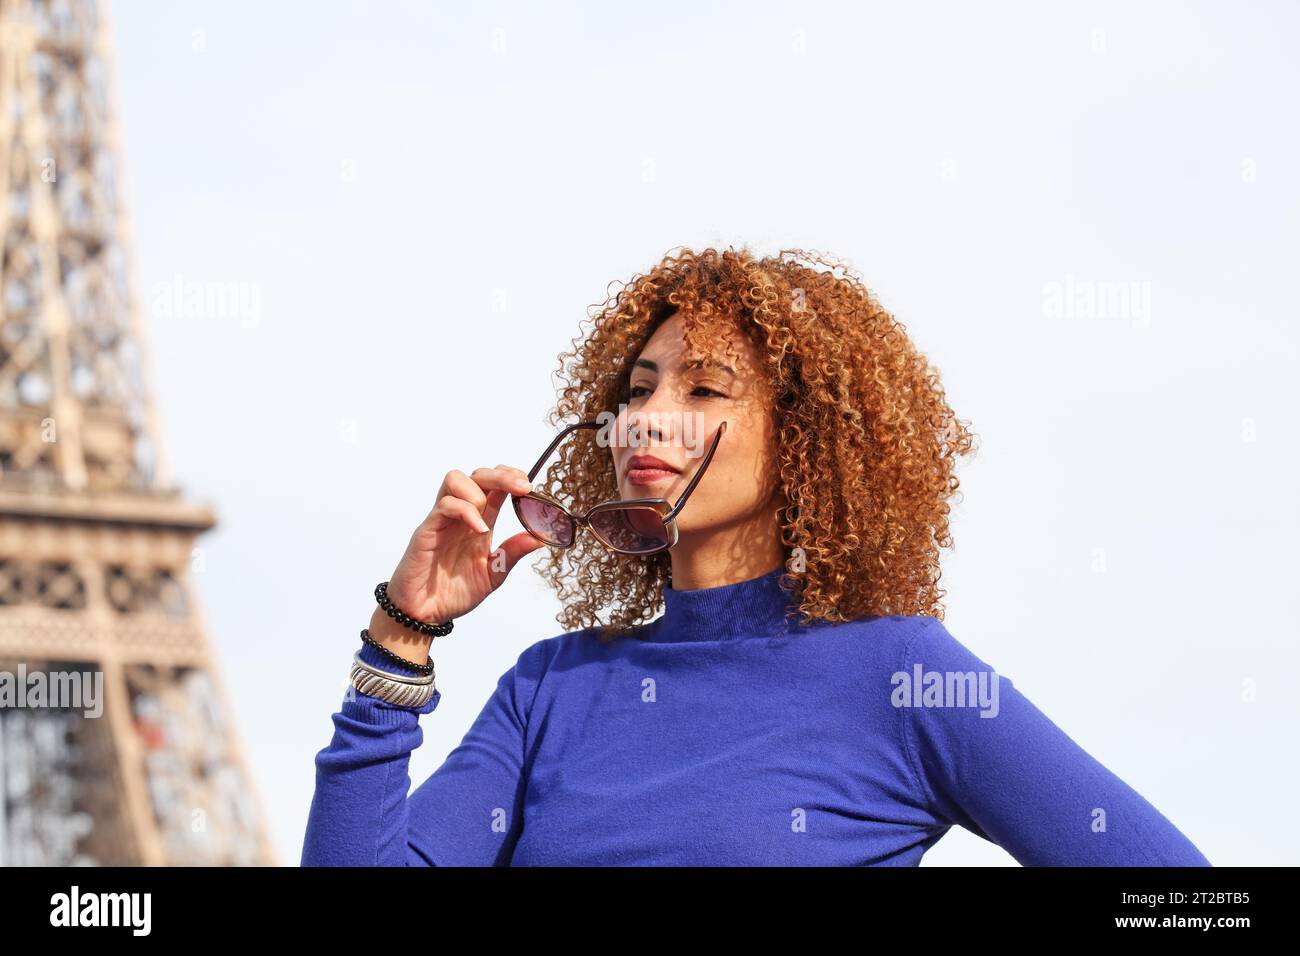 HAPPY CURLY HAIR YOUNG WOMAN IN BLUE SWEATER HOLDING HER SUNGLASSES AT THE EIFFEL TOWER Stock Photo